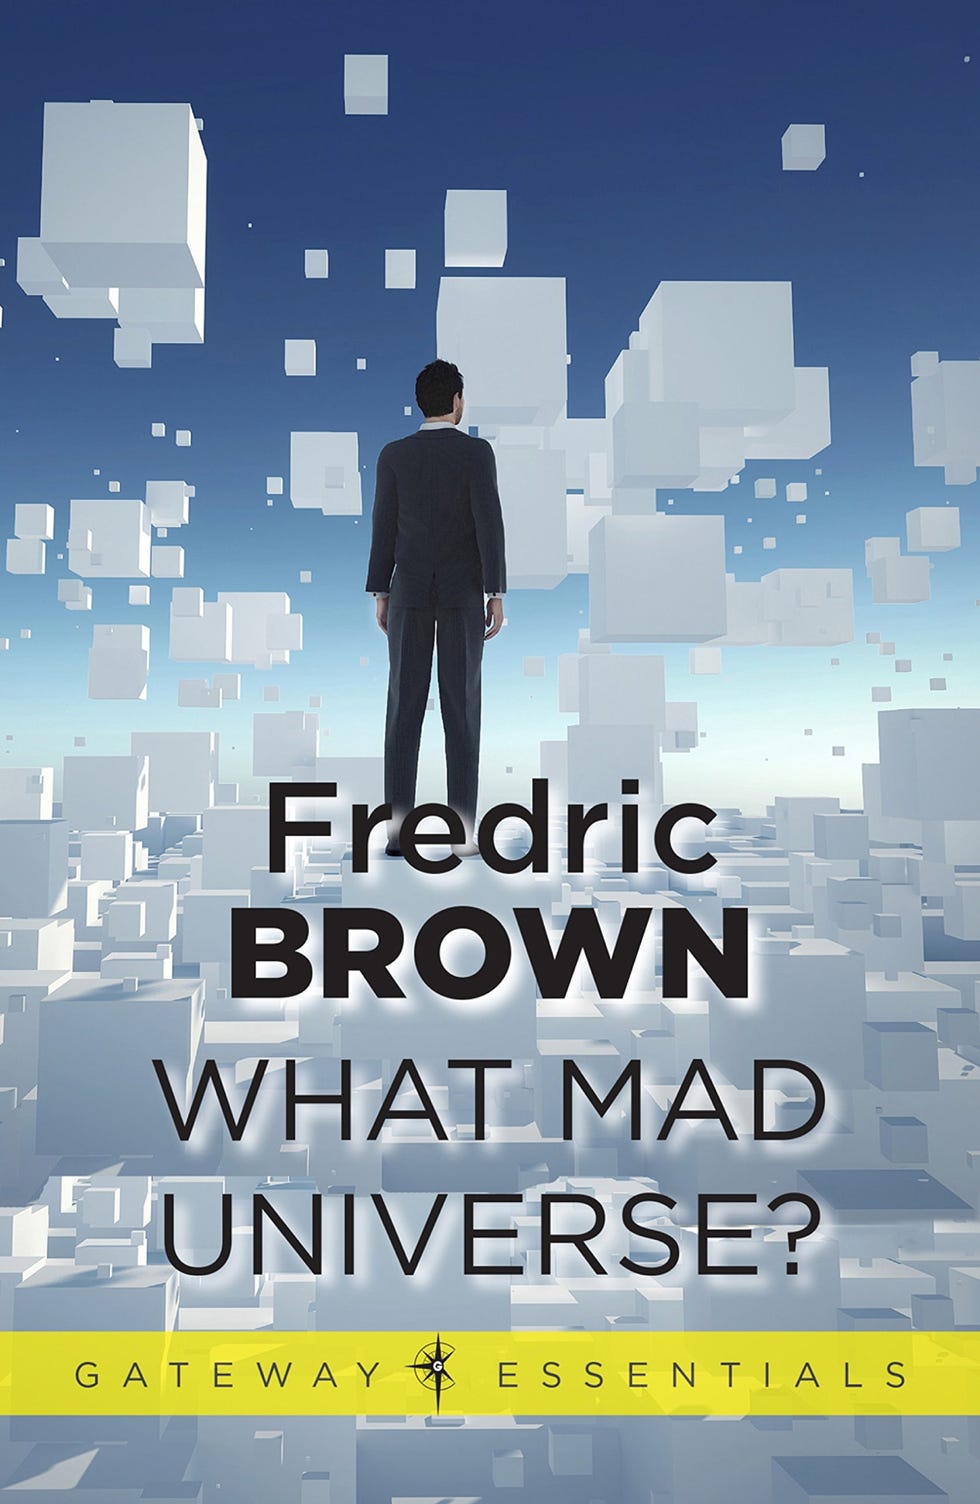 What Mad Universe, by Fredric Brown